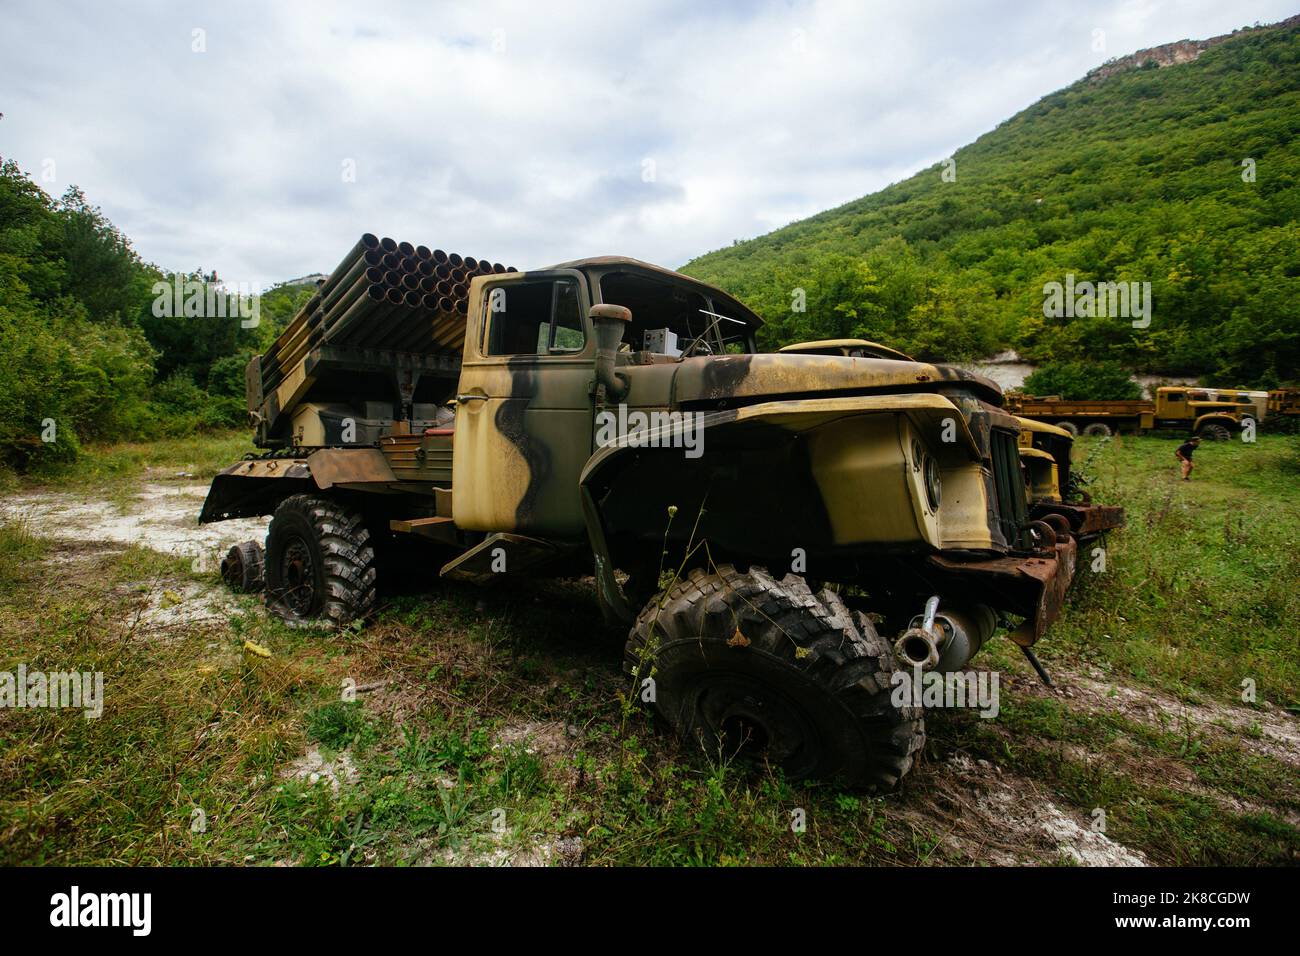 Old abandoned rusty military trucks overgrown by plants Stock Photo